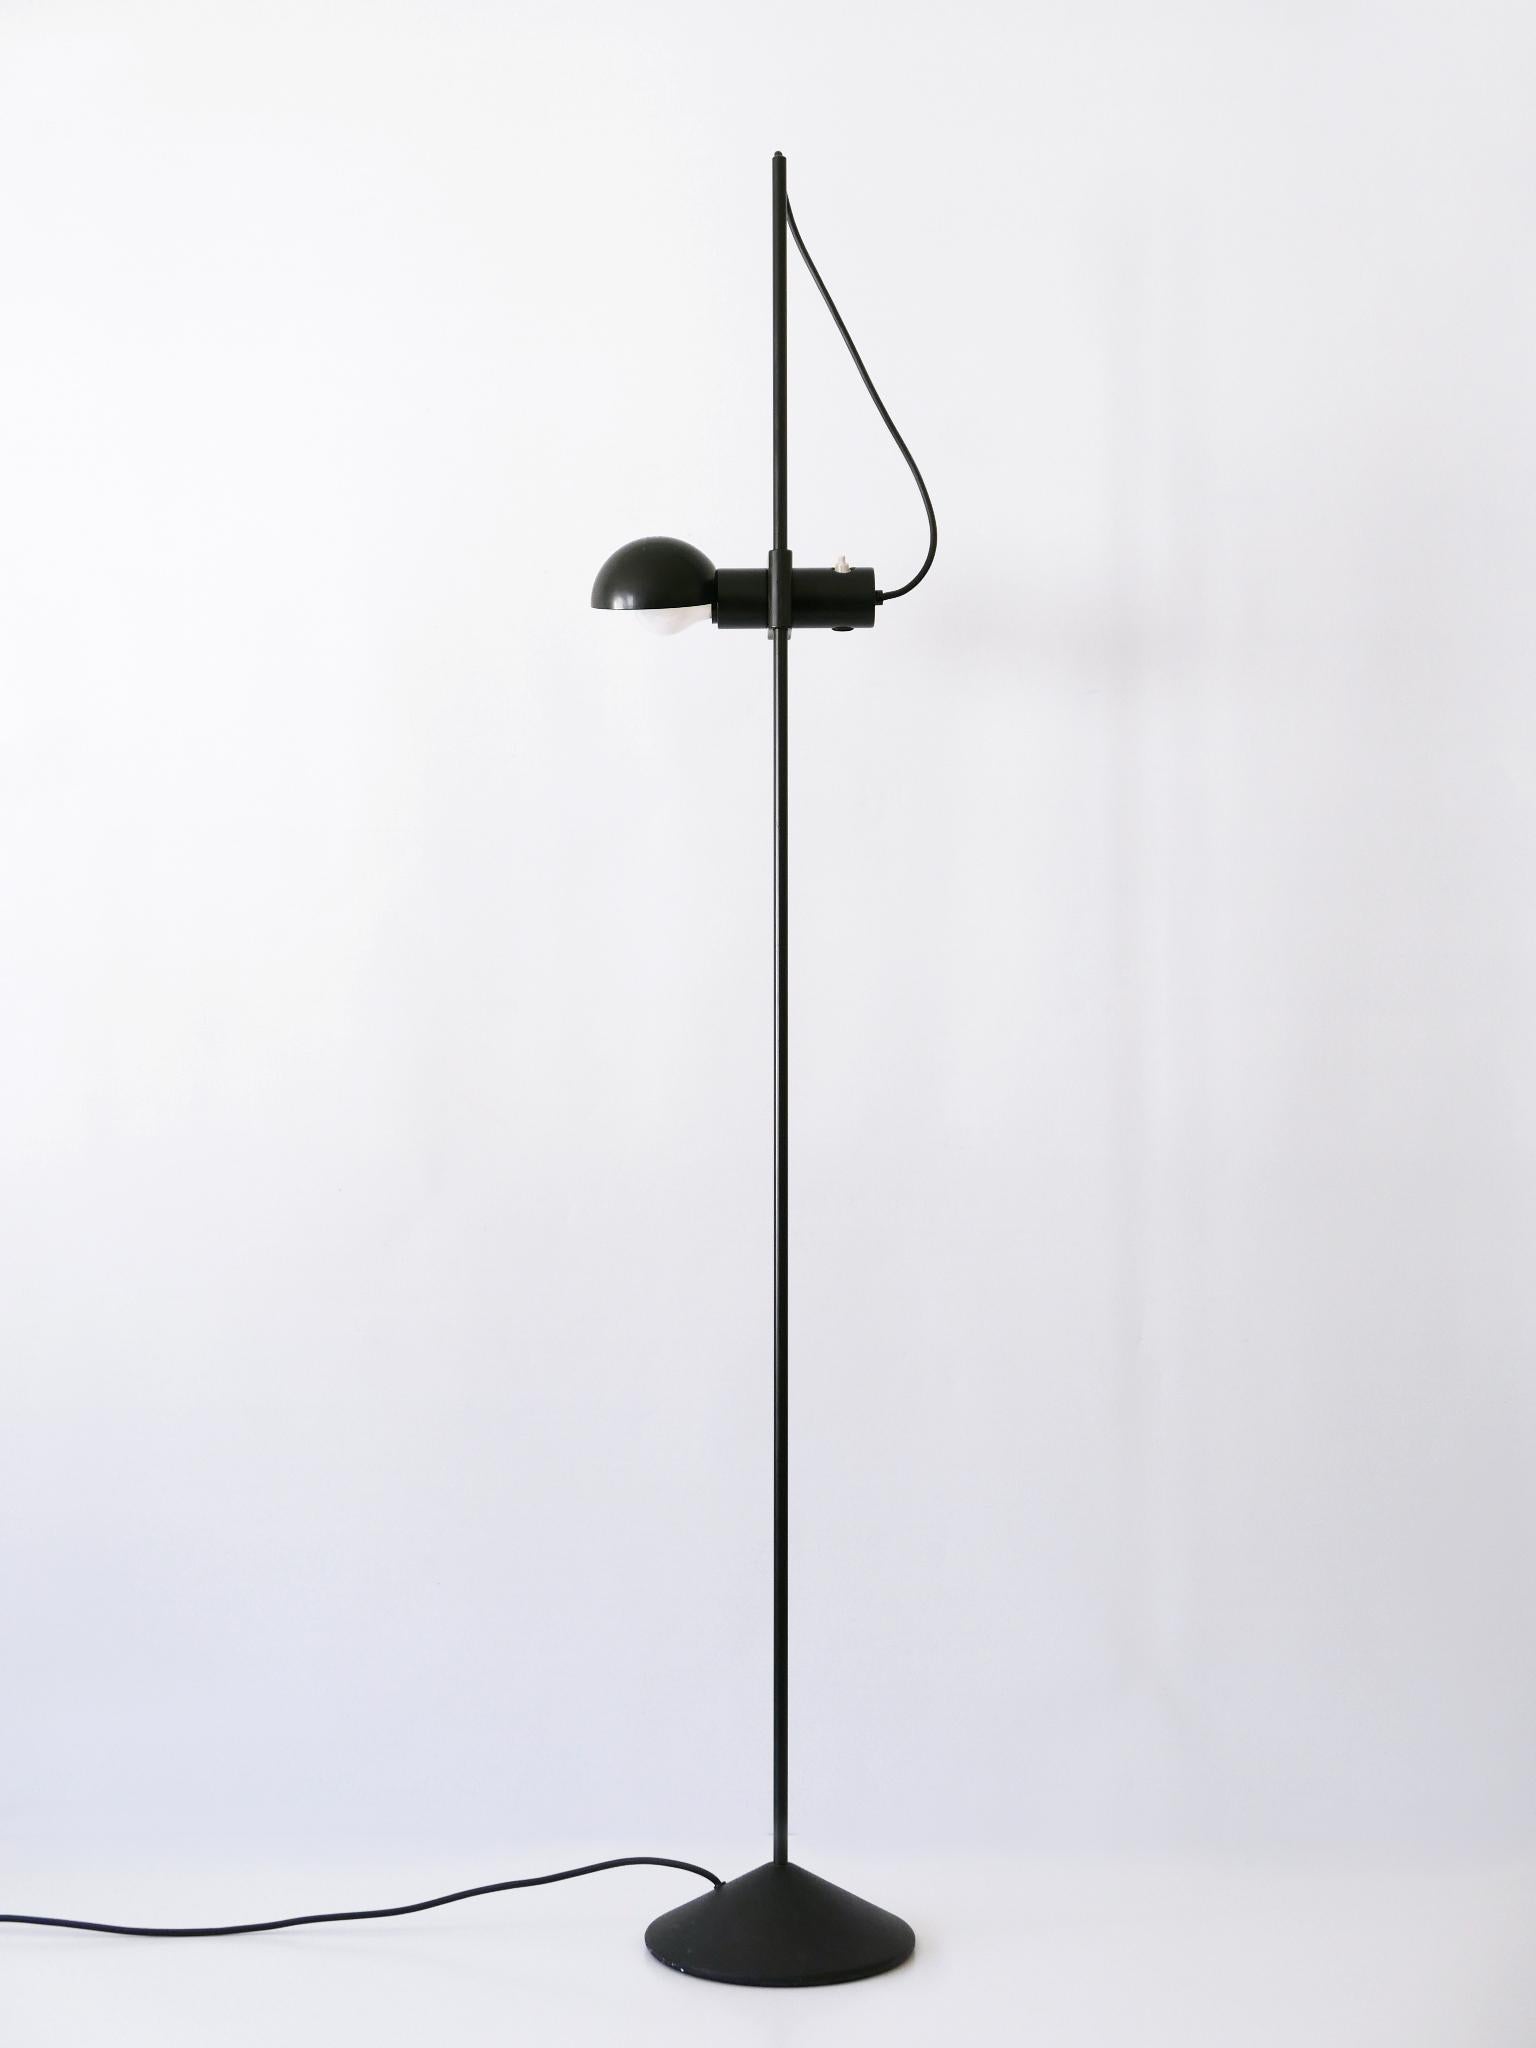 Rare Floor Lamp or Reading Light by Barbieri e Marianelli for Tronconi 1970s For Sale 9